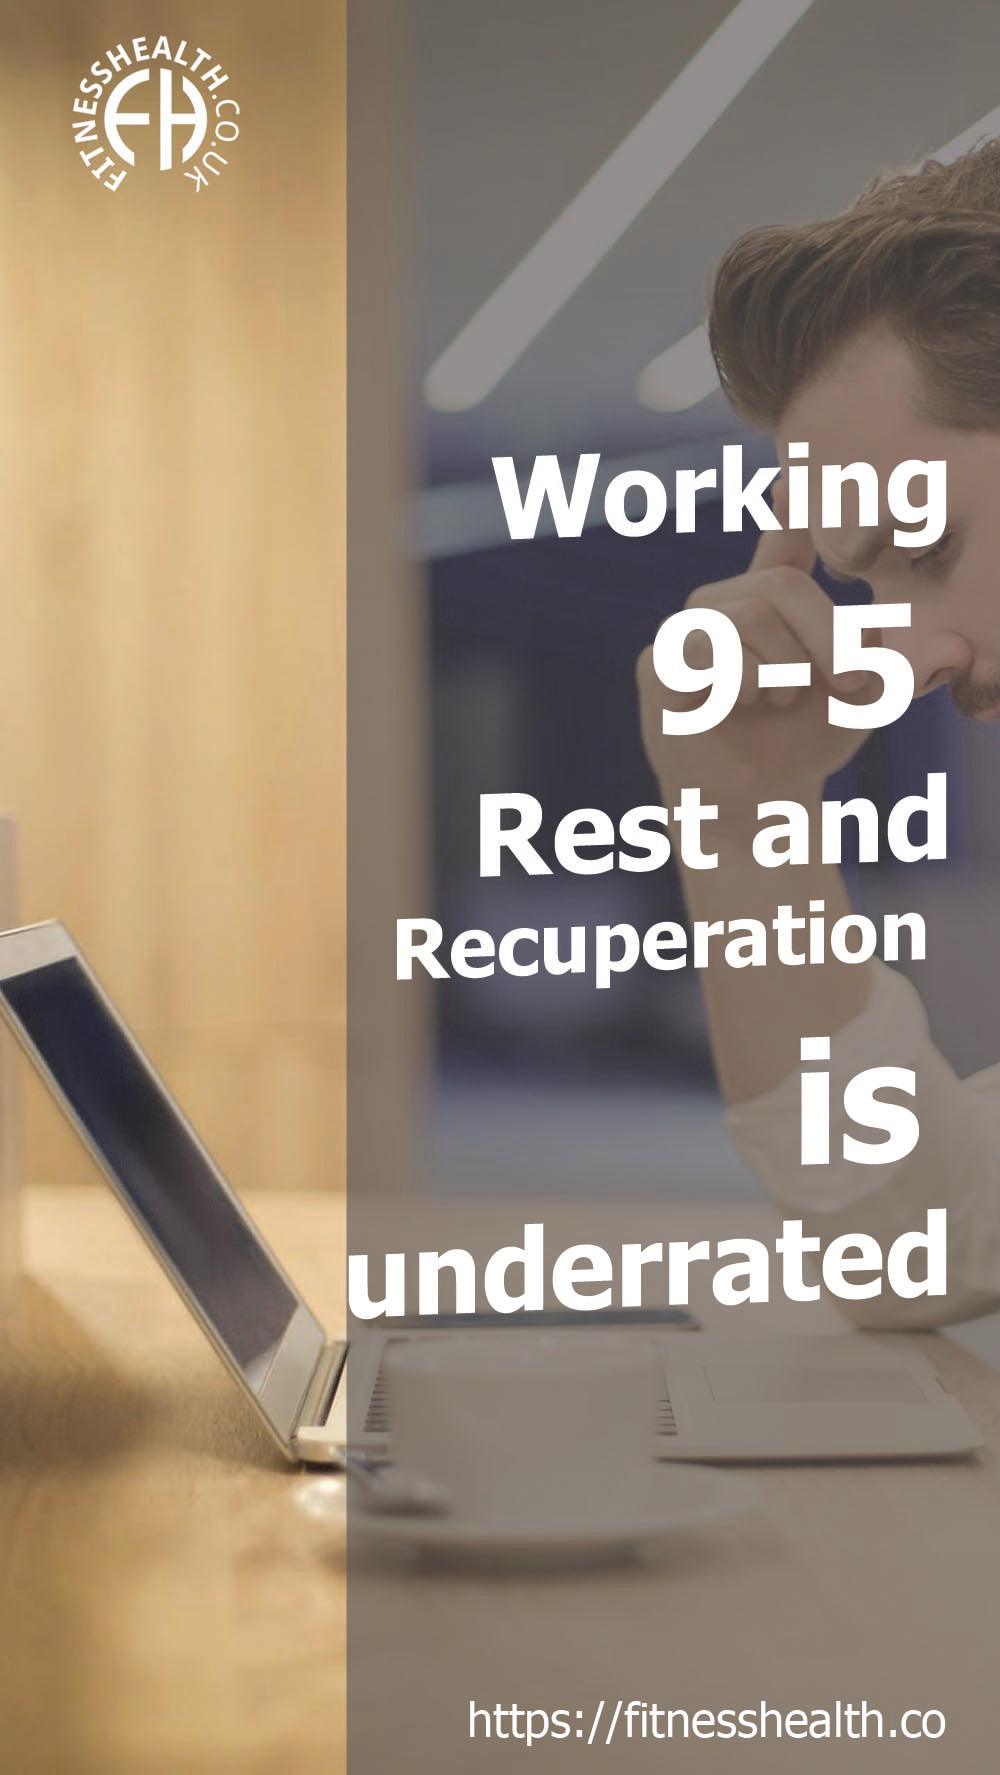 Working 9-5 - Rest and Recuperation is underrated - Fitness Health 